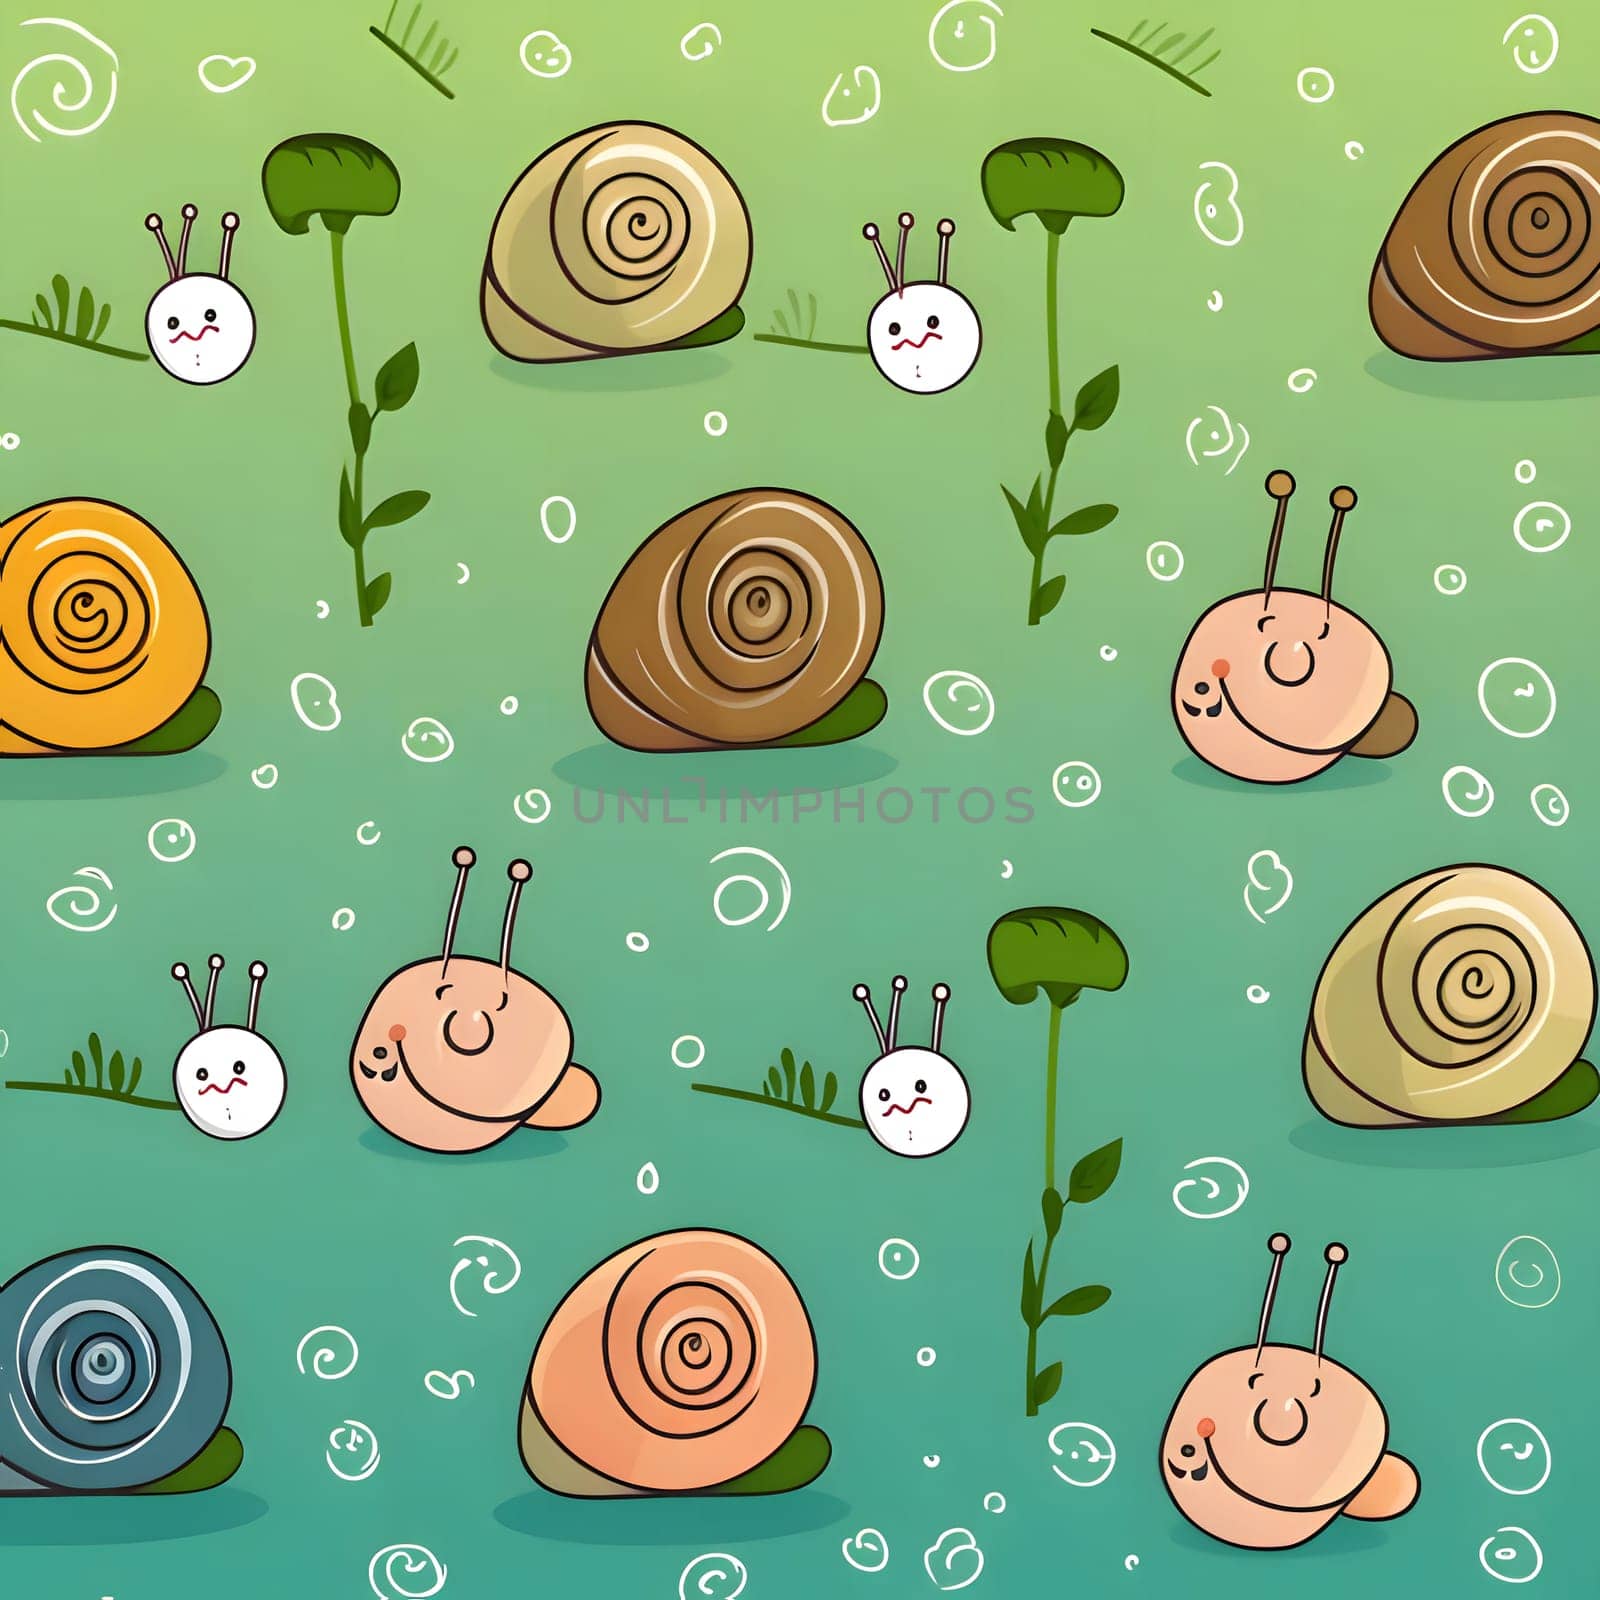 Patterns and banners backgrounds: Seamless pattern with cute cartoon snail on green background. Vector illustration.